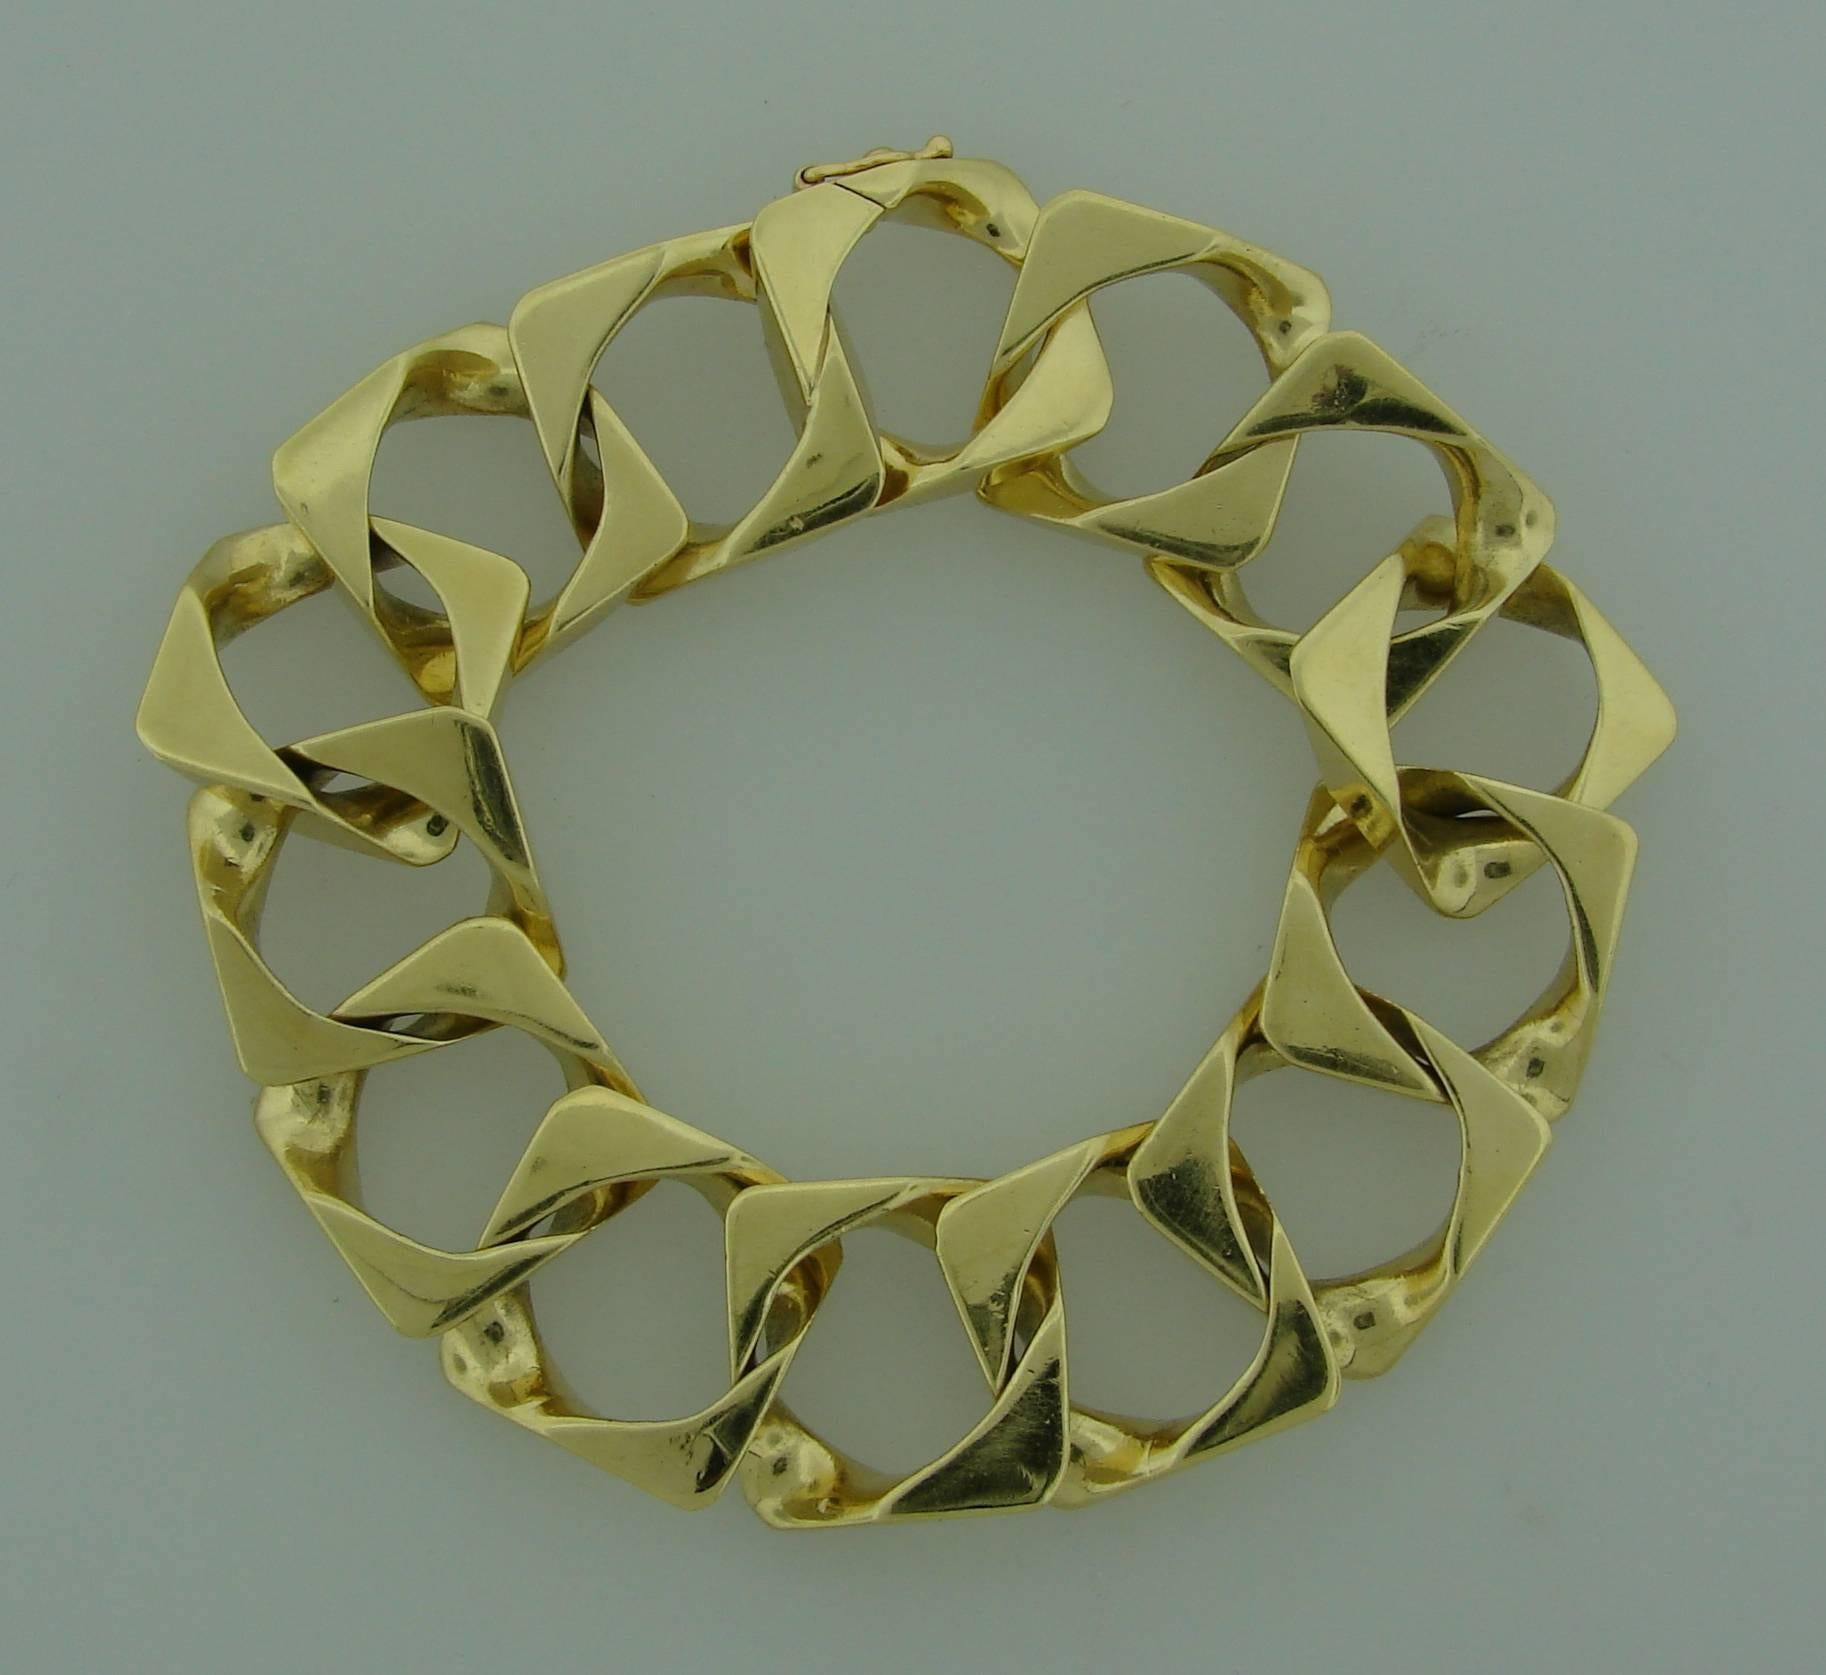 Classy link bracelet created by Tiffany & Co. in the 1970's. Made of 18k (stamped) yellow gold. Nice elegant squarish link. Timeless and wearable. 
The bracelet is 7.5